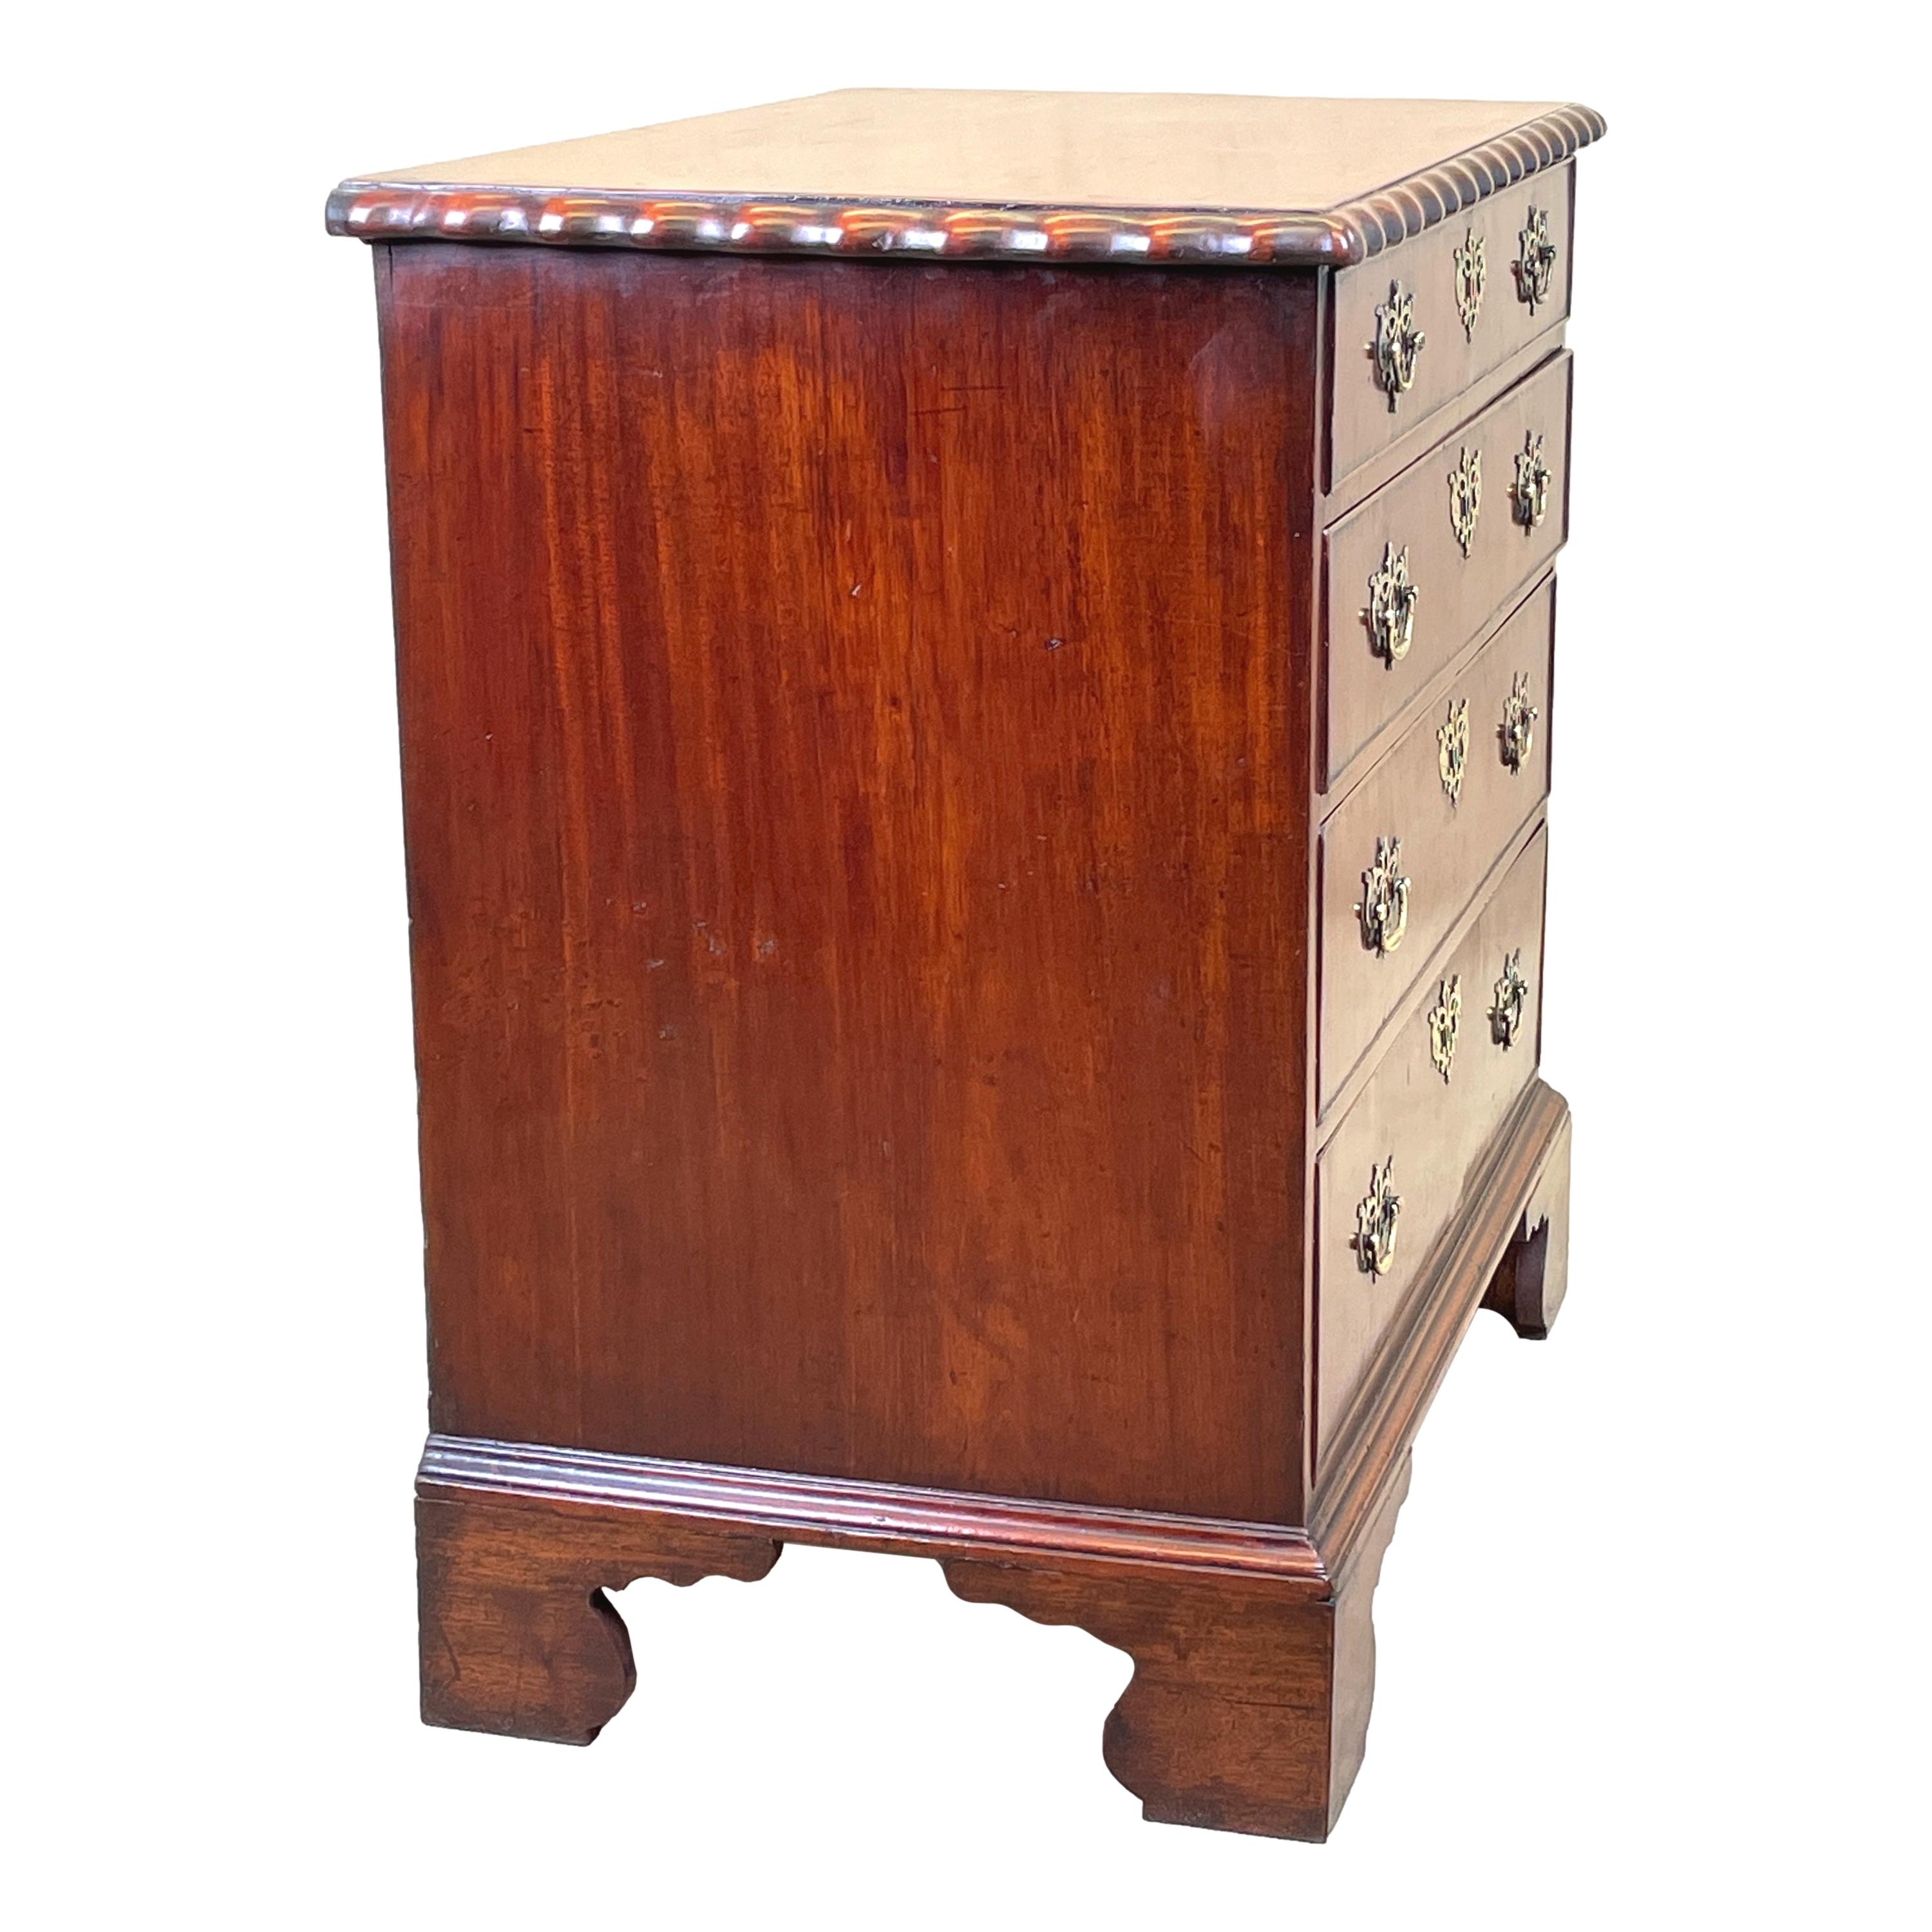 An Attractive and very good quality mid 18th century walnut chest, retaining good colour throughout, with unusual bold wavy moulded edge to top over four long drawers with replacement pierced plate brass handles, raised on elegant shaped bracket